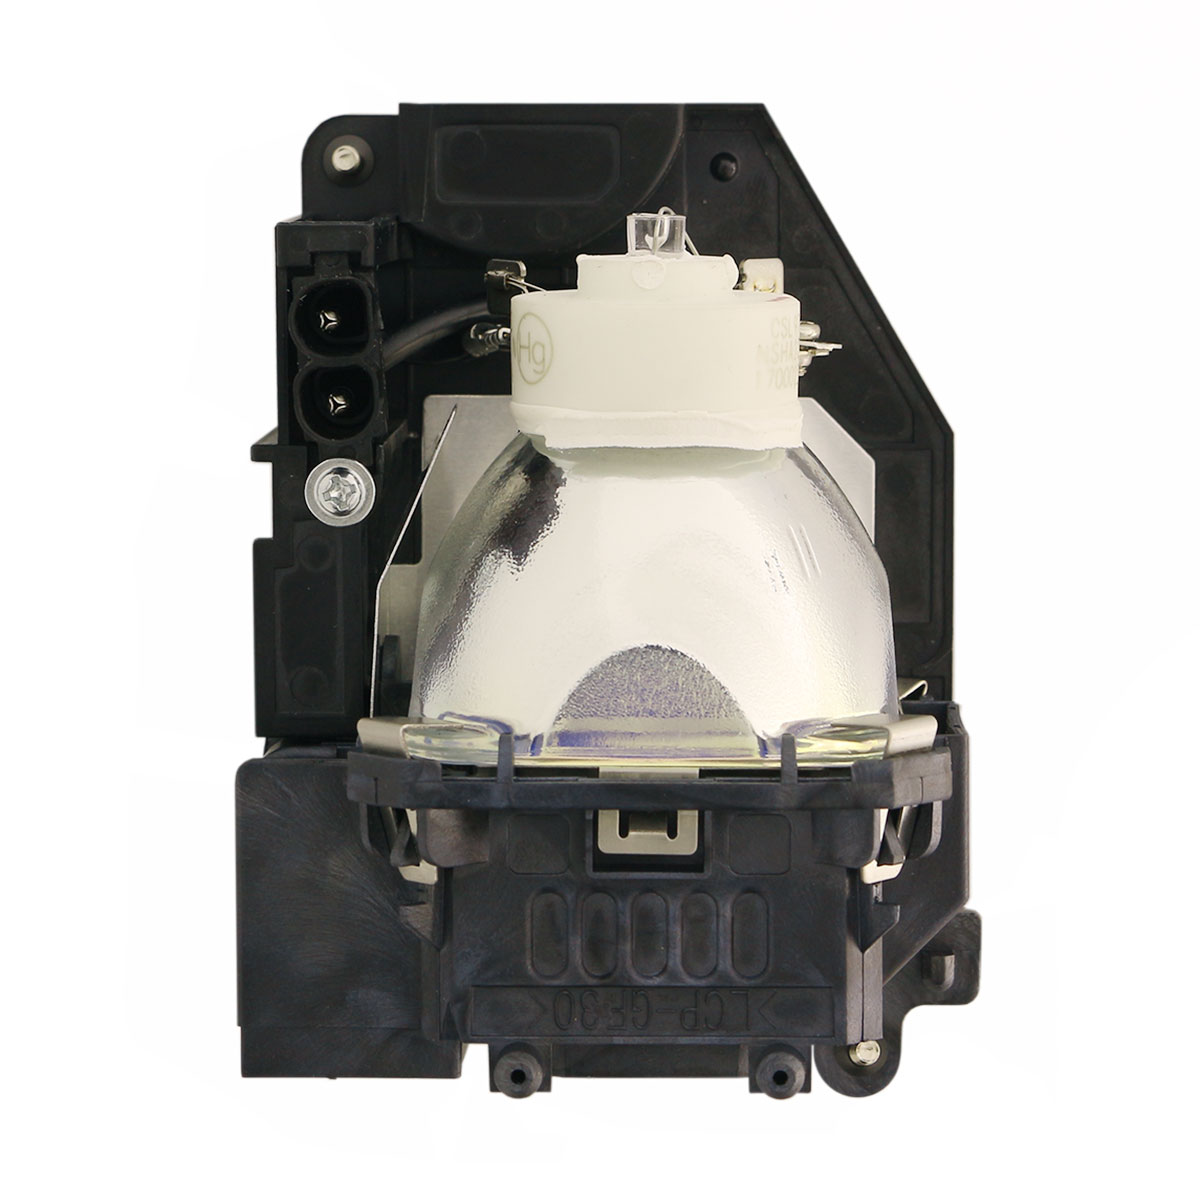 Original Ushio Replacement Lamp & Housing for the NEC NP-M260XS Projector - image 4 of 7